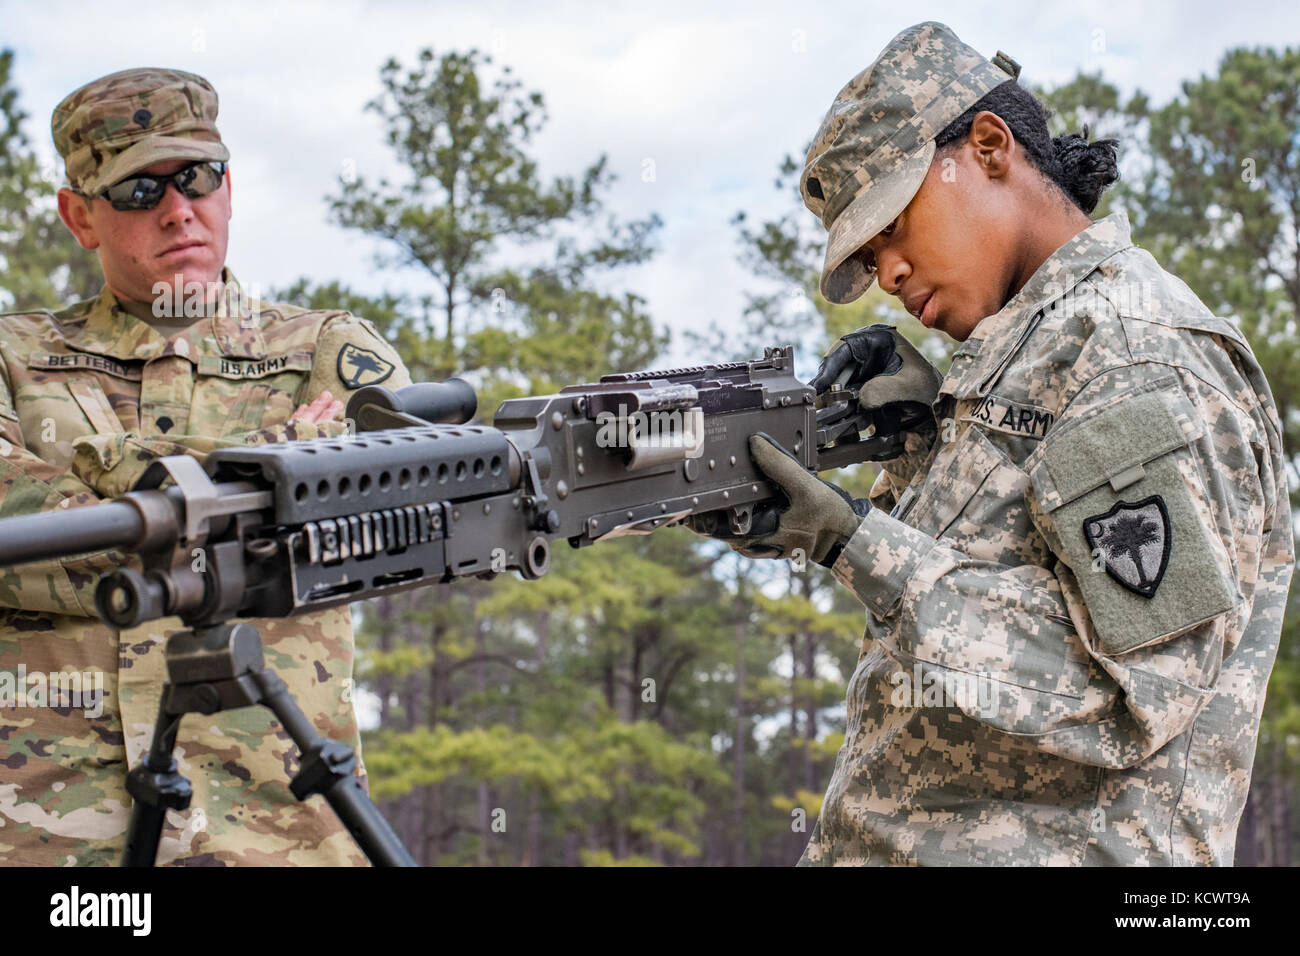 U.S. Army Spc. Valetta Burgess, 59th Aviation Troop Command, South Carolina Army National Guard, performs a functions check on the M249 Squad Automatic Weapon during the Best Warrior 2017 Competition at McCrady Training Center in Eastover, South Carolina, Jan. 29, 2017. The five-day event consisted of a road march, physical fitness test, and weapons qualification events, among others. Participants competed as individuals with an enlisted and non-commissioned officer winner being announced Feb. 1, 2017. (U.S. Army National Guard photo by Sgt. Brian Calhoun, 108th Public Affairs Det.) Stock Photo